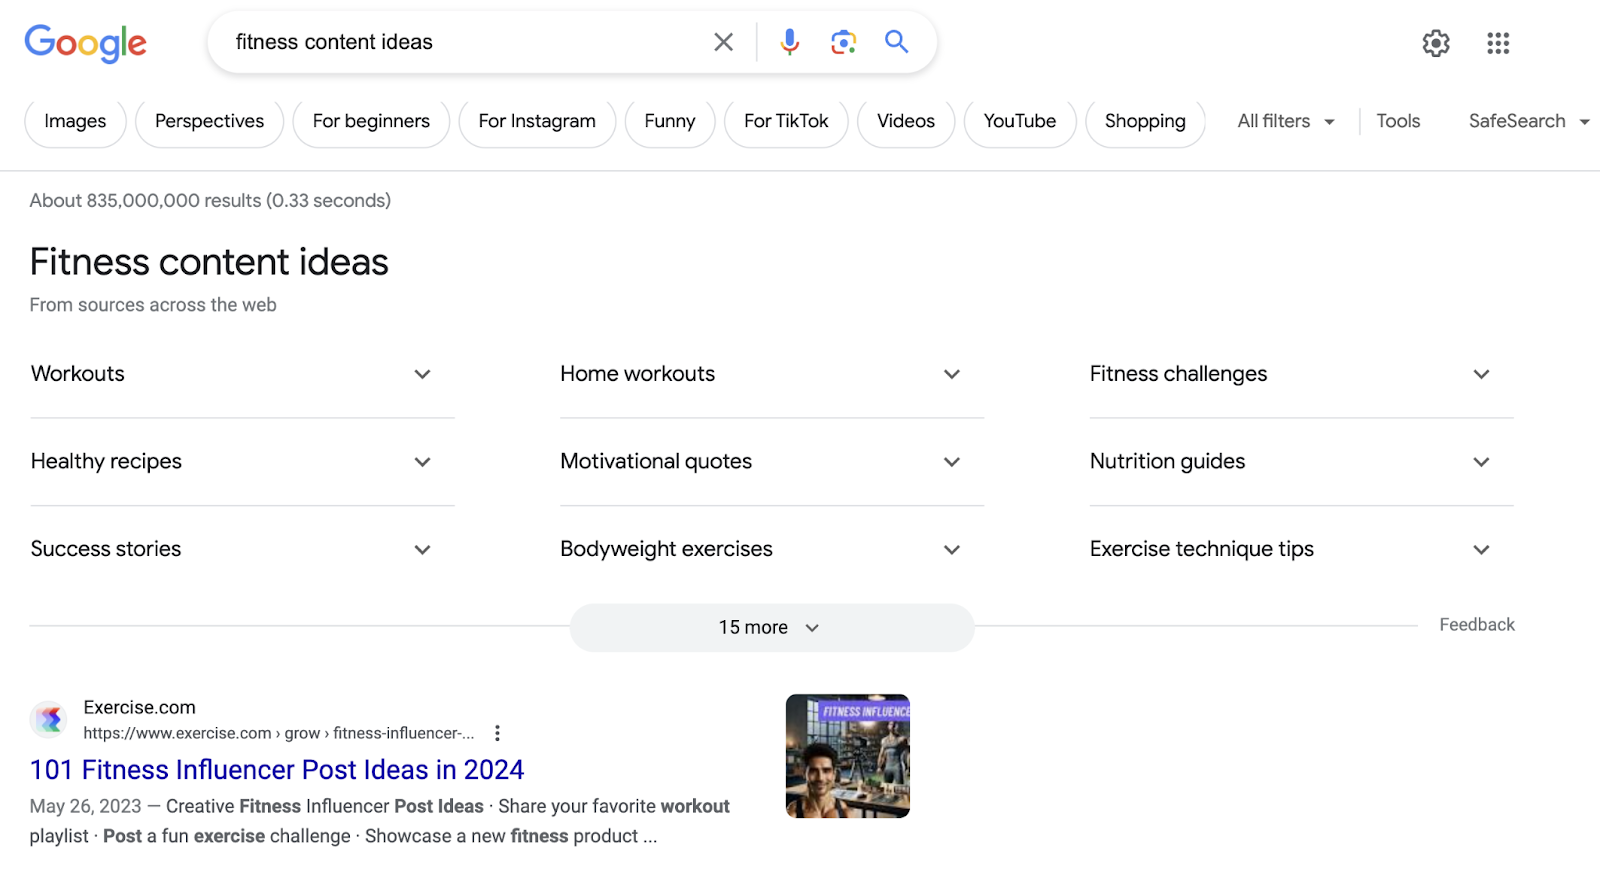 Google SERP for "fitness content ideas"